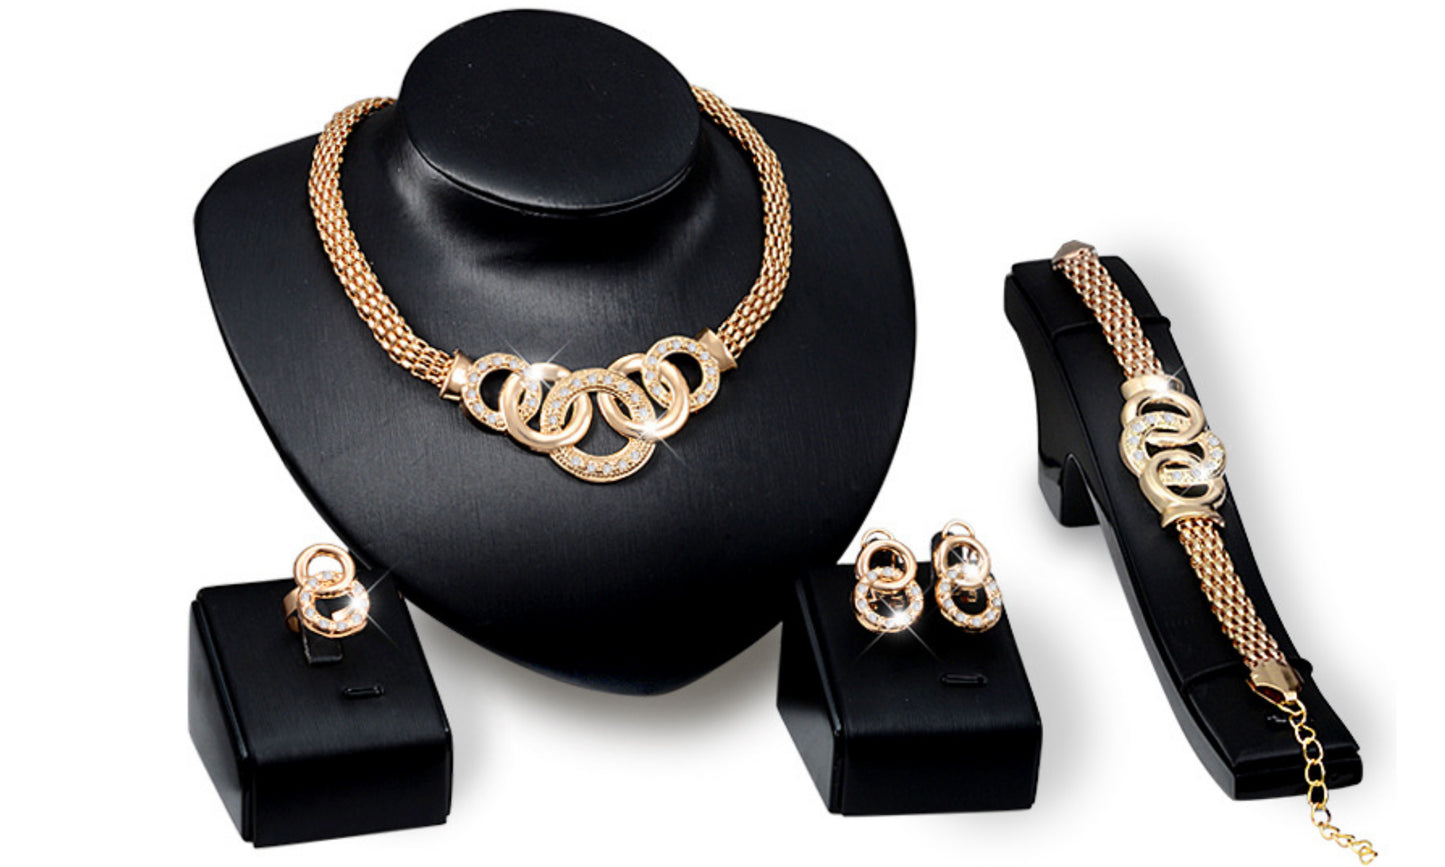 4 piece Mandorla Crystal Jewellery set Encrusted with Crystals from Swarovski® Elements